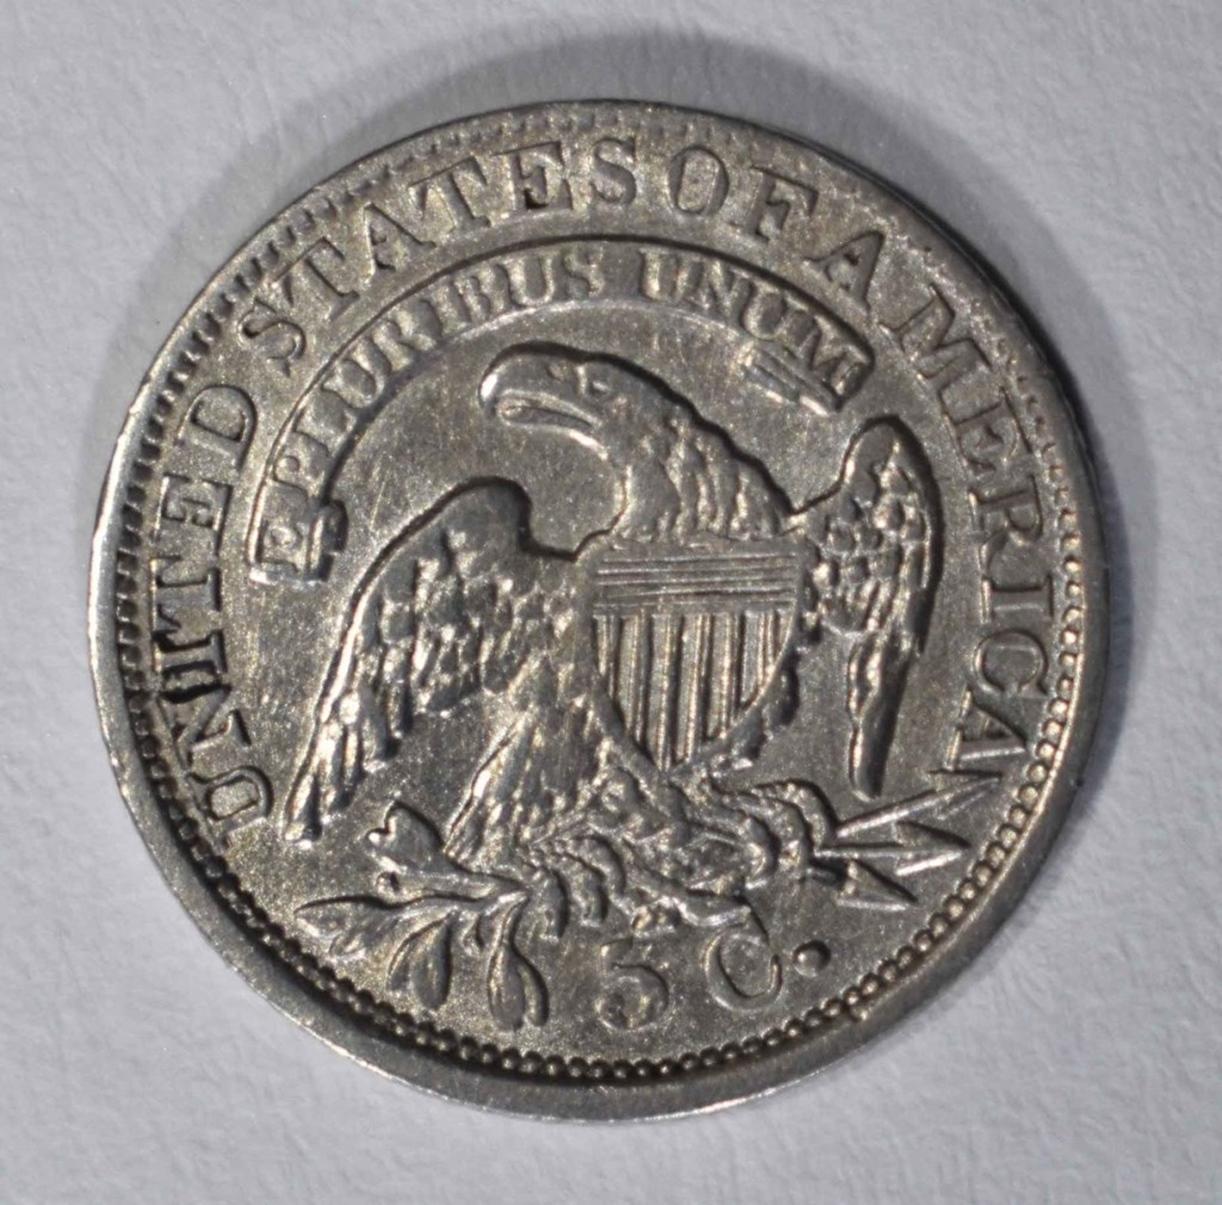 1835 CAPPED BUST HALF DIME, XF